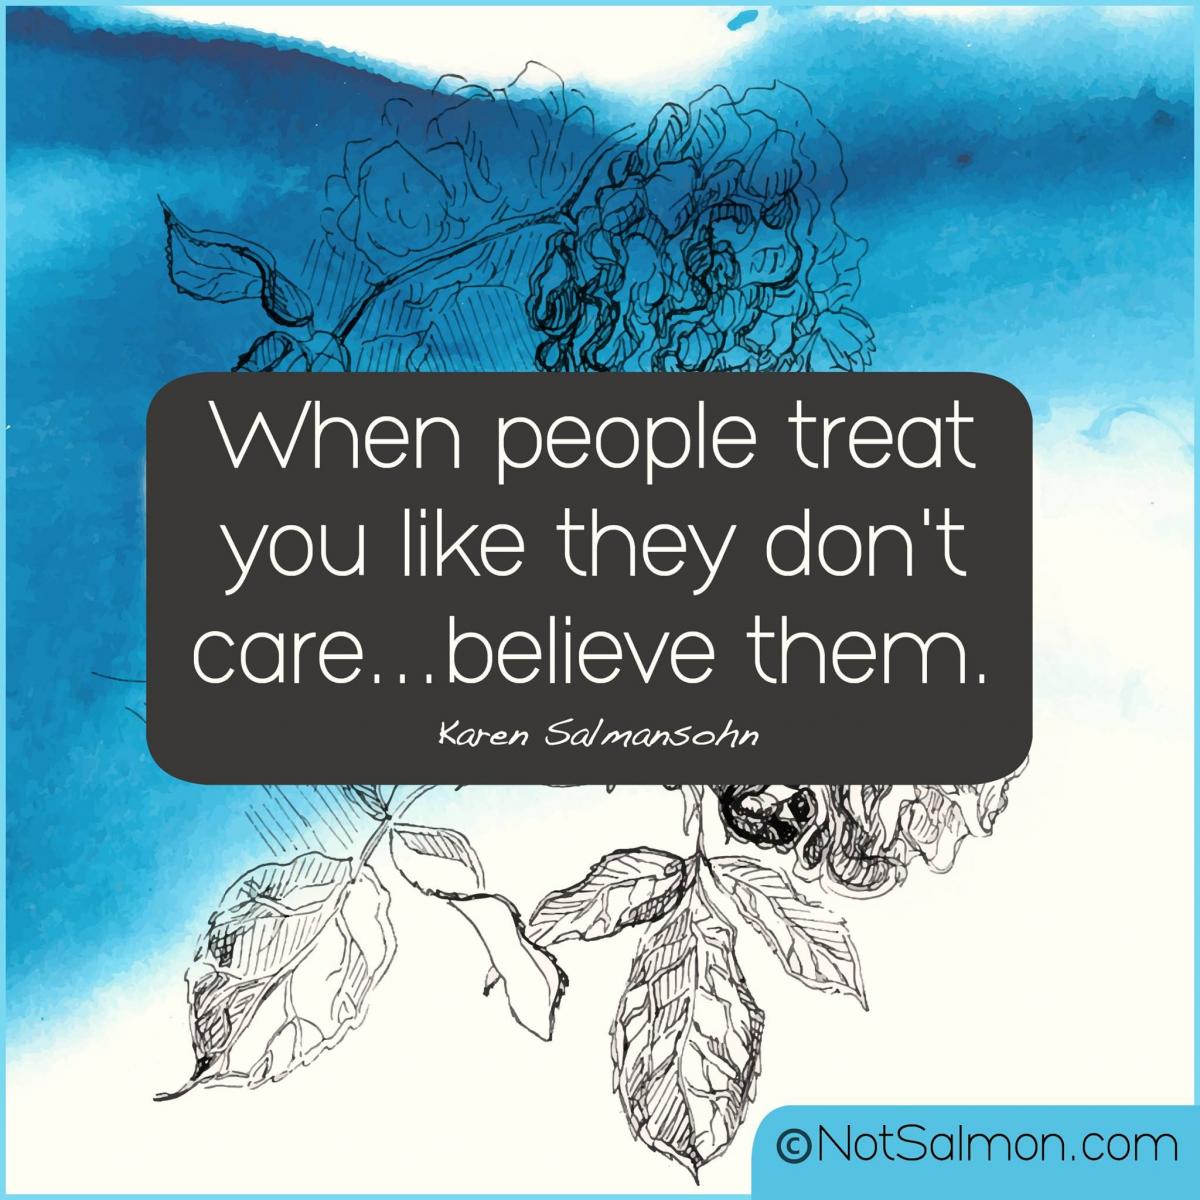 quote when people treat you like they don't care believe them